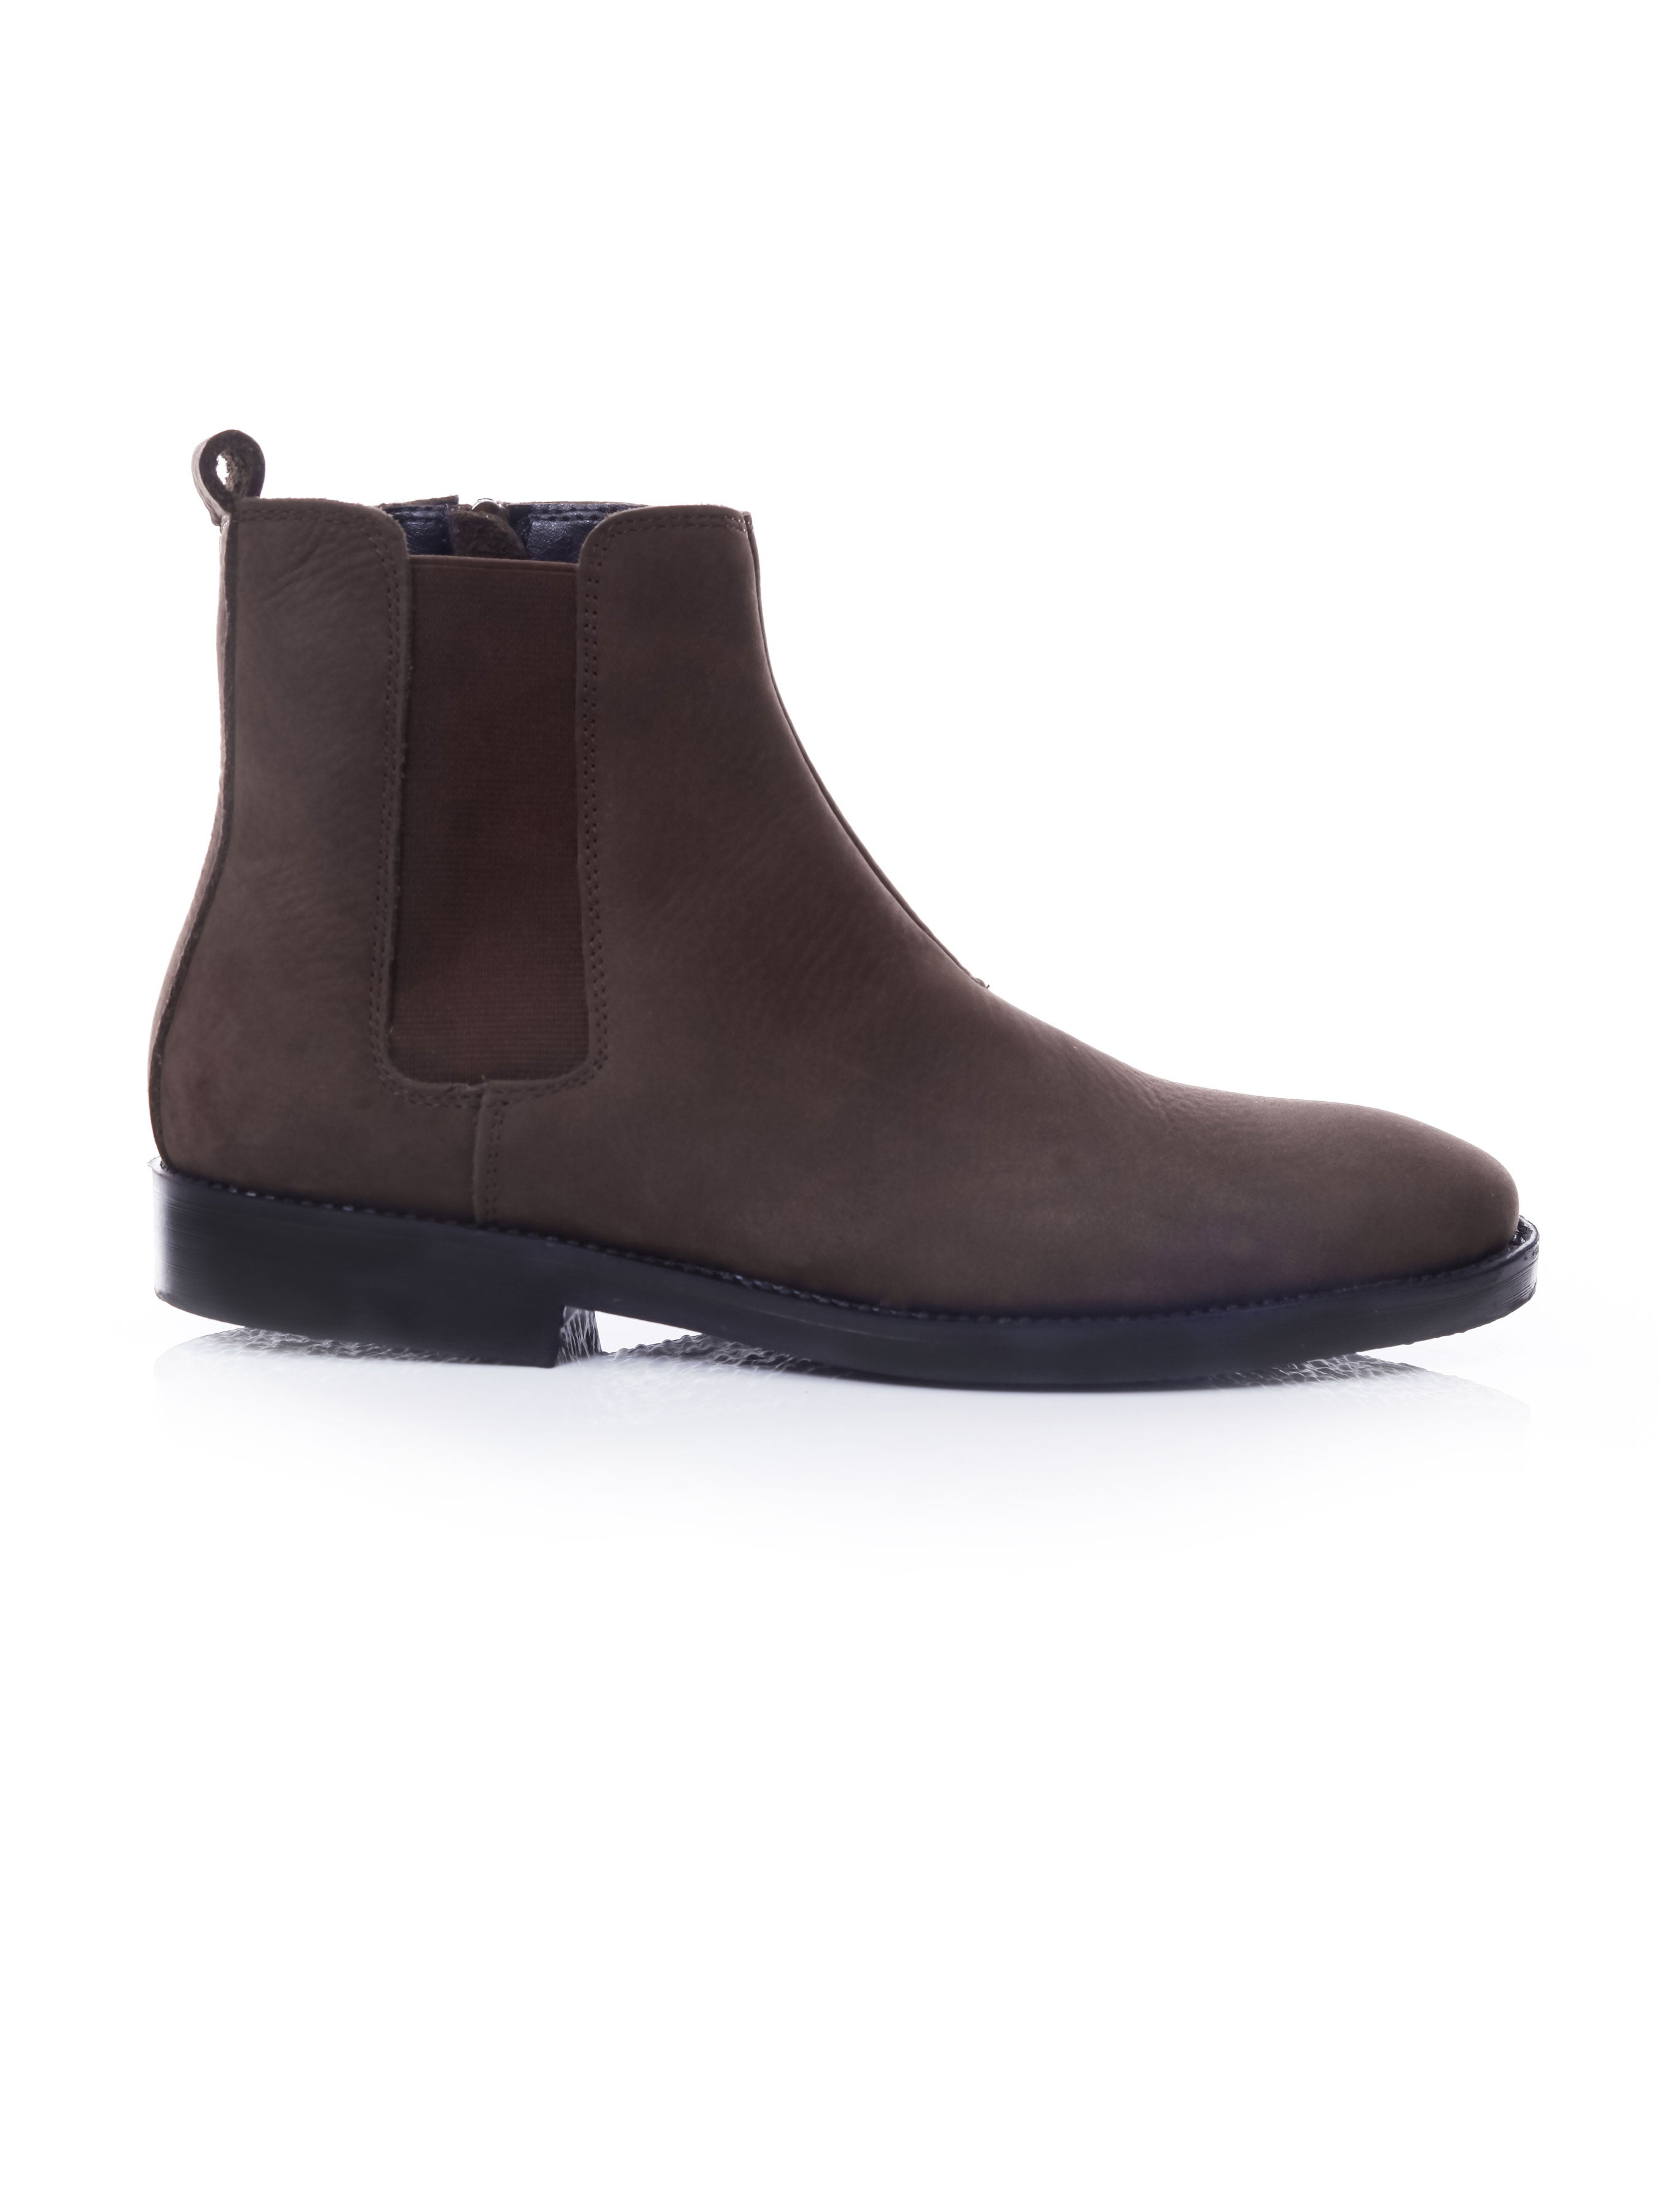 Chelsea Boots With Zipper - Coffee Nubuck Leather (Crepe Sole) - Zeve Shoes